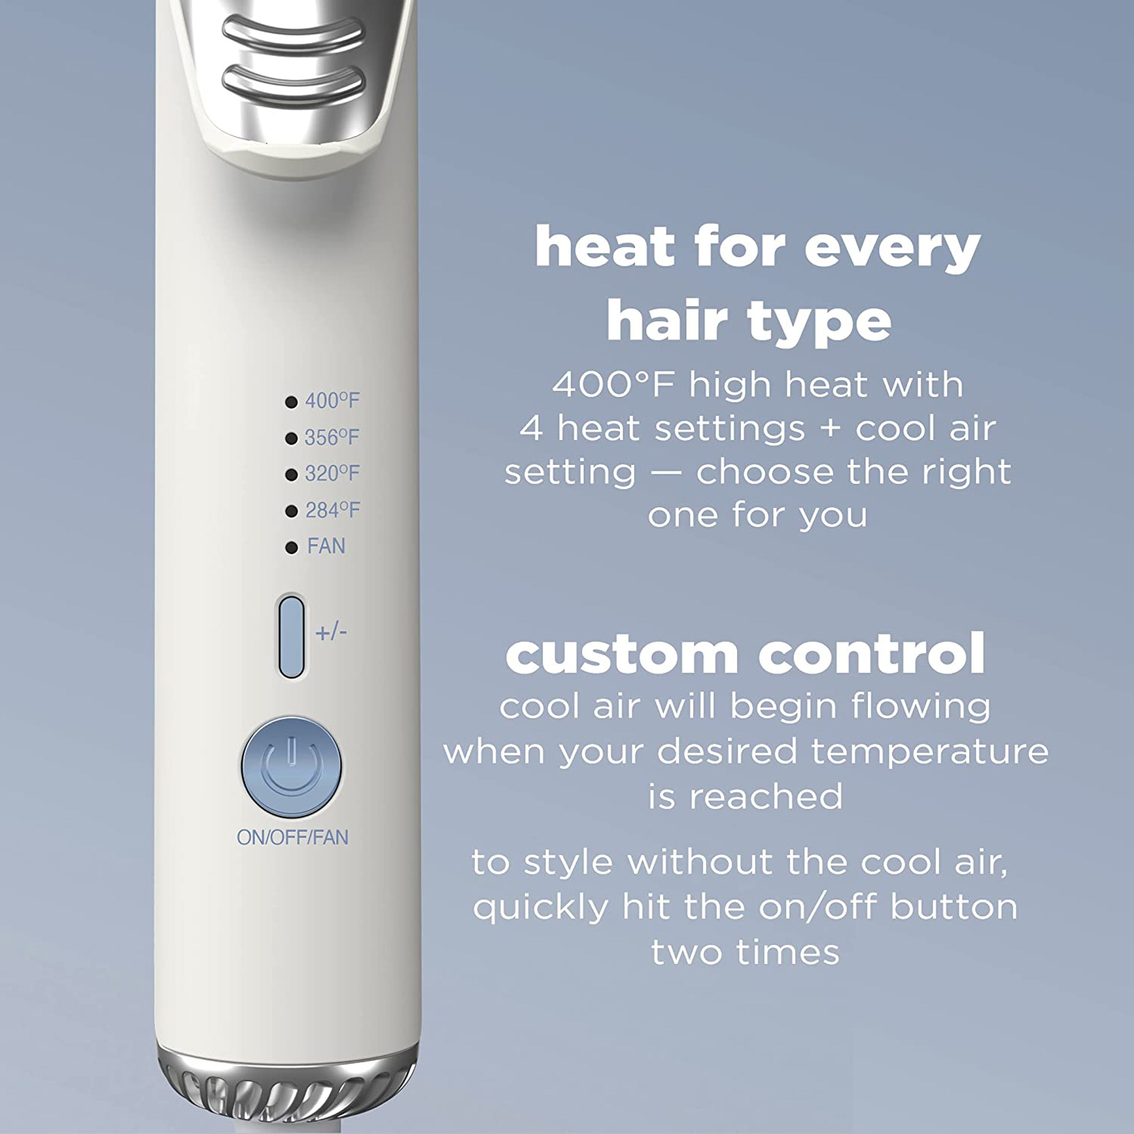 Conair InfPRO Cool Air Luxe Styler - Image 4 of 10